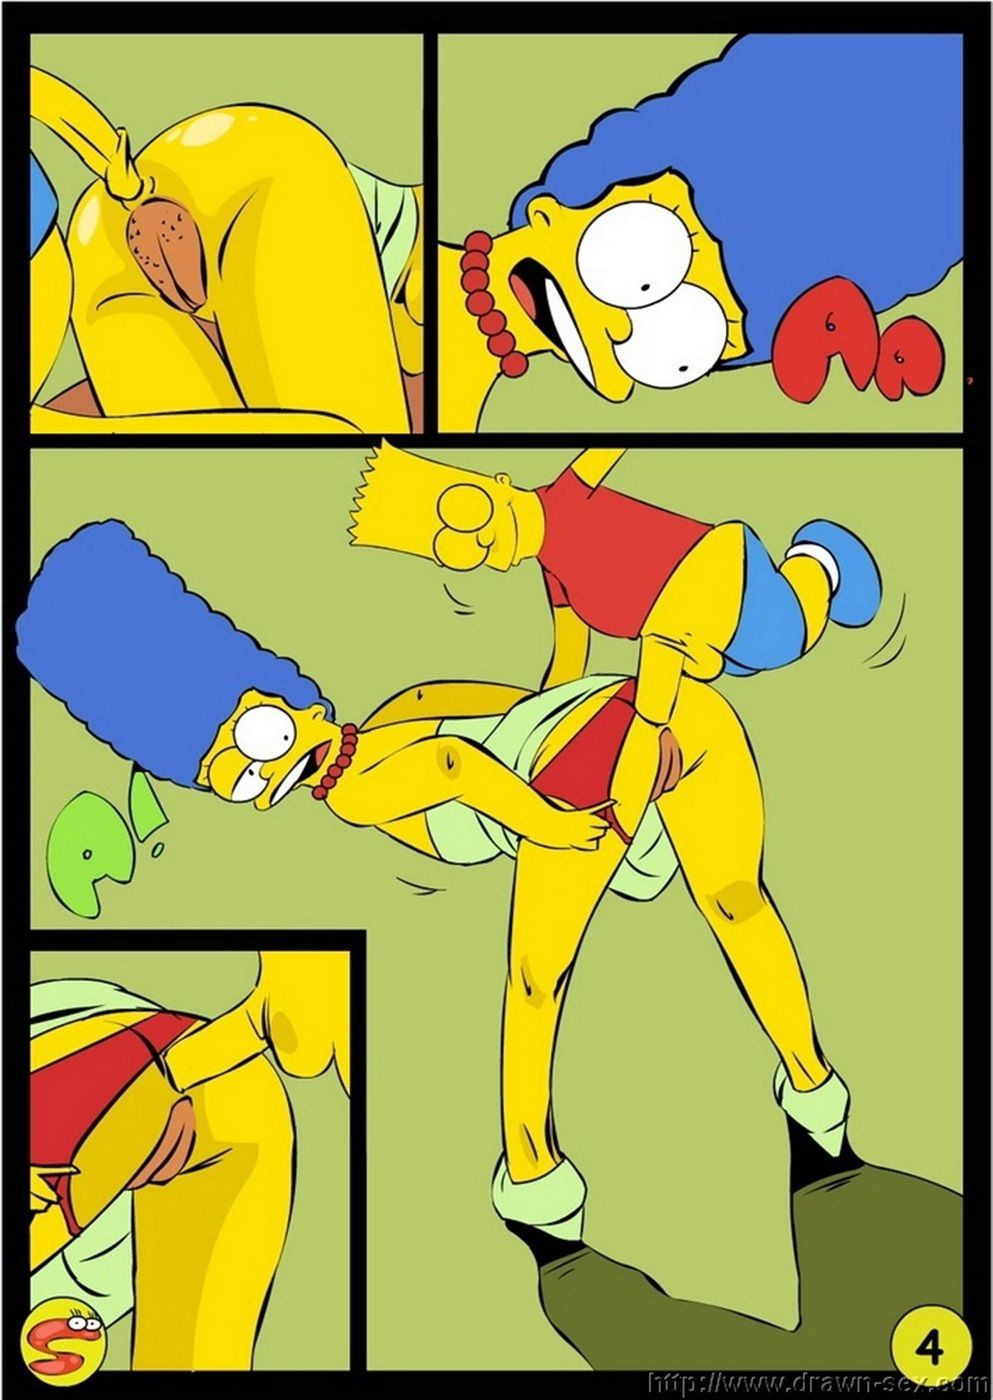 Wit Simpsons - Drawn Sex page 4